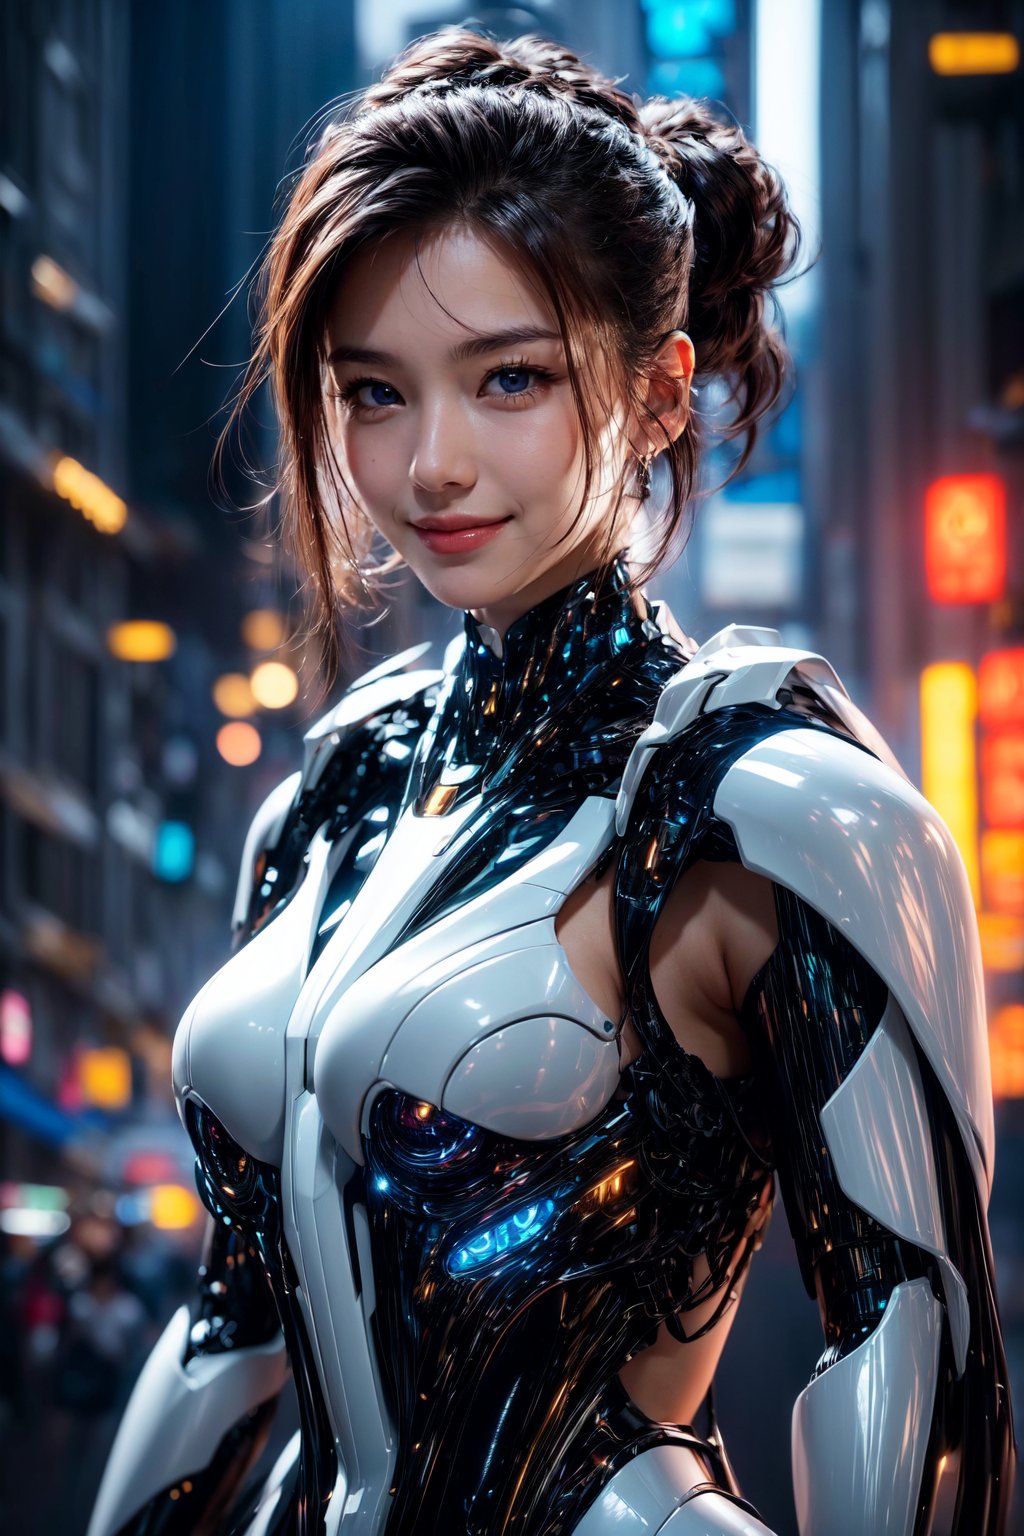 masterpiece, high quality, 64K, HDR, Unity 64K Wallpaper, Best Quality, RAW, Super Fine Photography, Super High Resolution, Super Detailed, Beautiful and Aesthetic,
1girl, solo, elegant face, detailed face, white skin, cute, Pure and pretty, Perfect facial features, perfect eyes, detailed skin, realistic skin details, visible pores, sharp focus, perfect proportions, stunningly beautiful, dynamic pose, delicate face, lively eyes, Exquisite face, Battle stance, swaying hair, 
futuristic Mecha, Arms Mecha, Hands Mecha, 
Dark City night, Fine architecture, accurate architectural structure, Cyberpunk city, Cyberpunk architecture, future architecture,
gorgeous, detailed complex busy background, Body Parts,